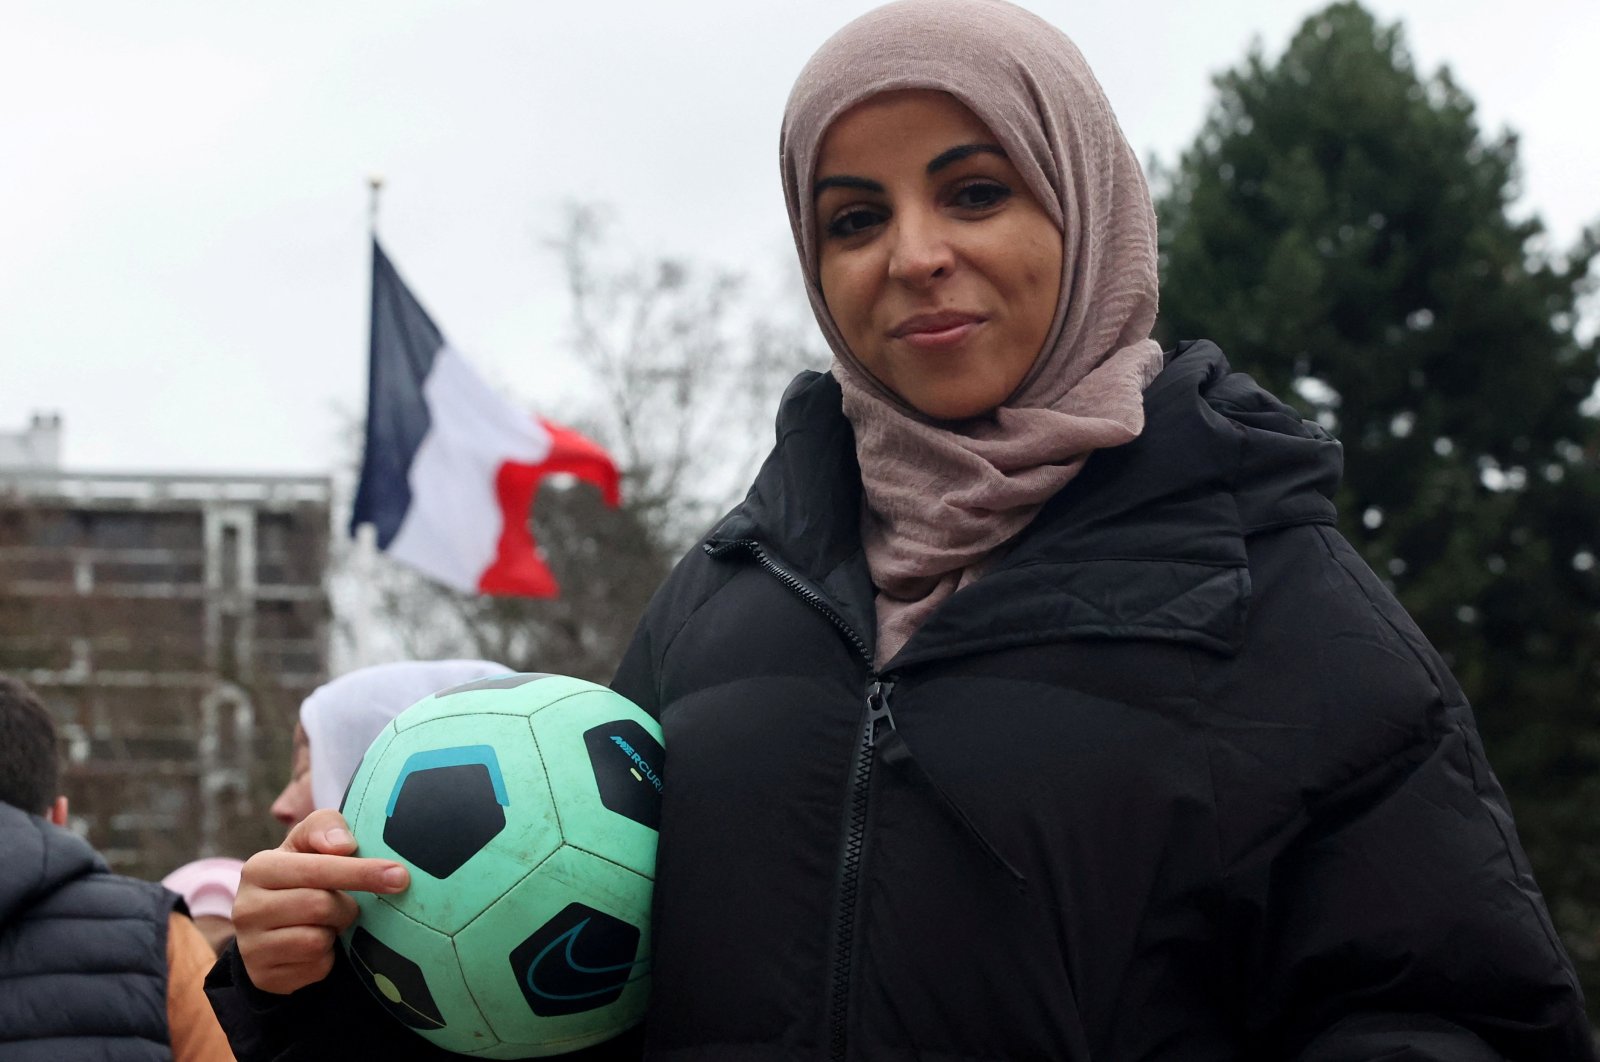 Writer Majid Siham poses with a football during a gathering to support the women&#039;s team &quot;Les Hijabeuses&quot; in front of the city hall in Lille as part of a protest as the French Senate examines a bill featuring a controversial hijab ban in competitive sports, Paris, France, Feb. 16, 2022. (Reuters Photo)